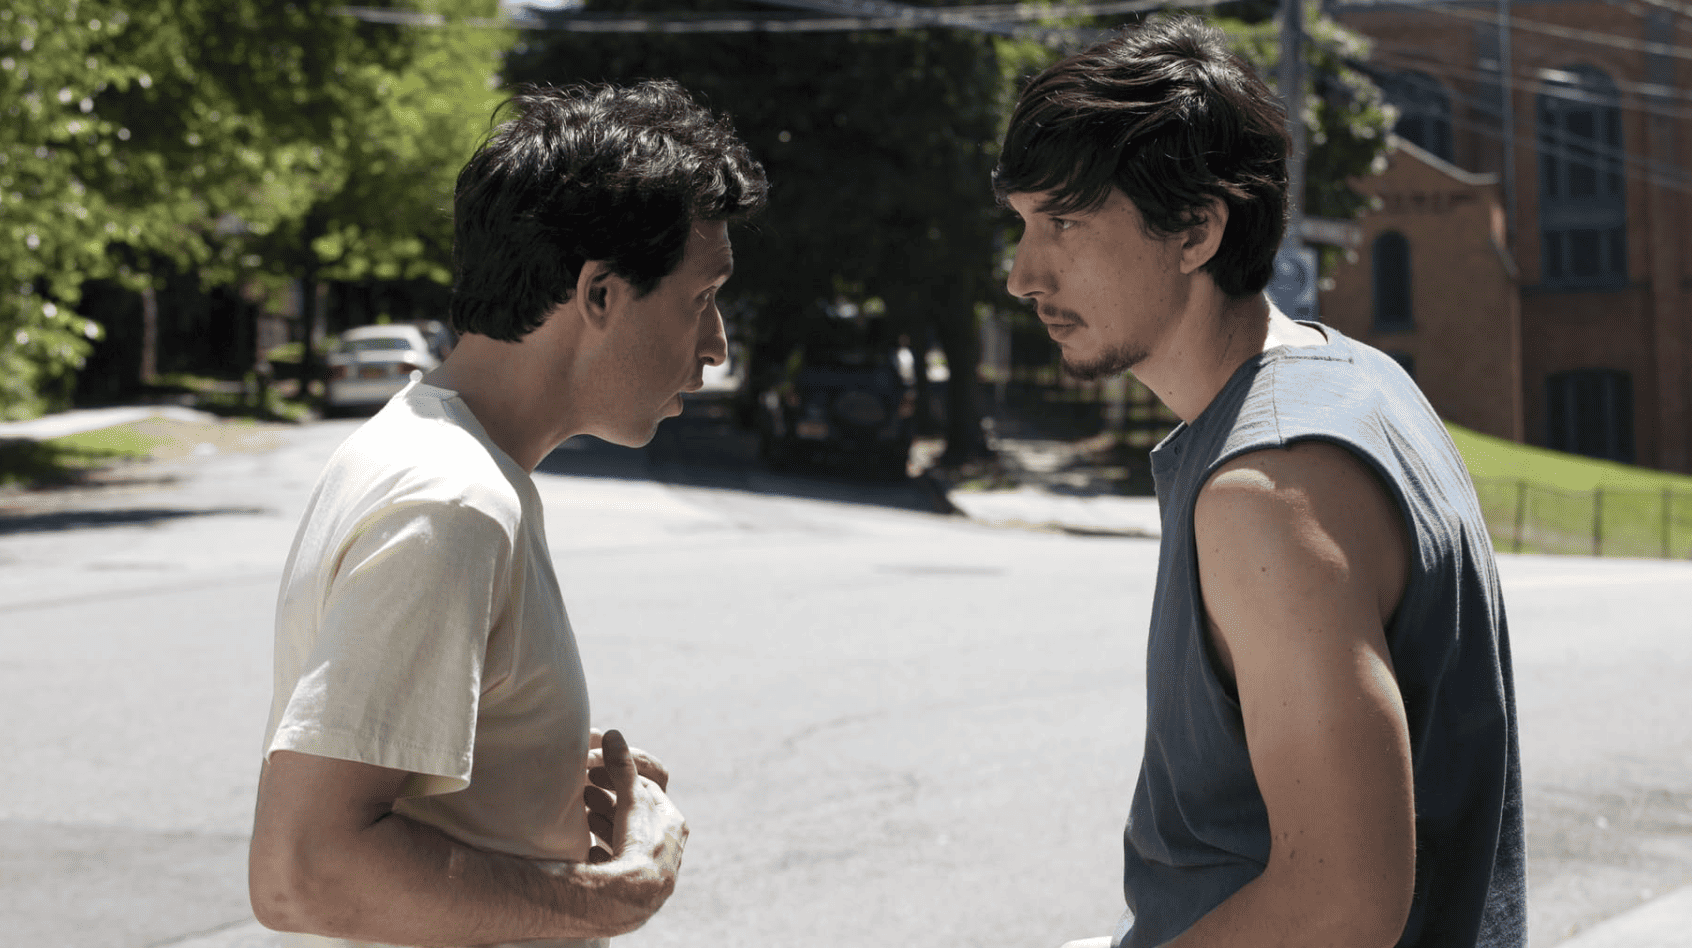 Alex Karpovsky and Adam Driver standing under the scorching sun in this image from Apatow Productions